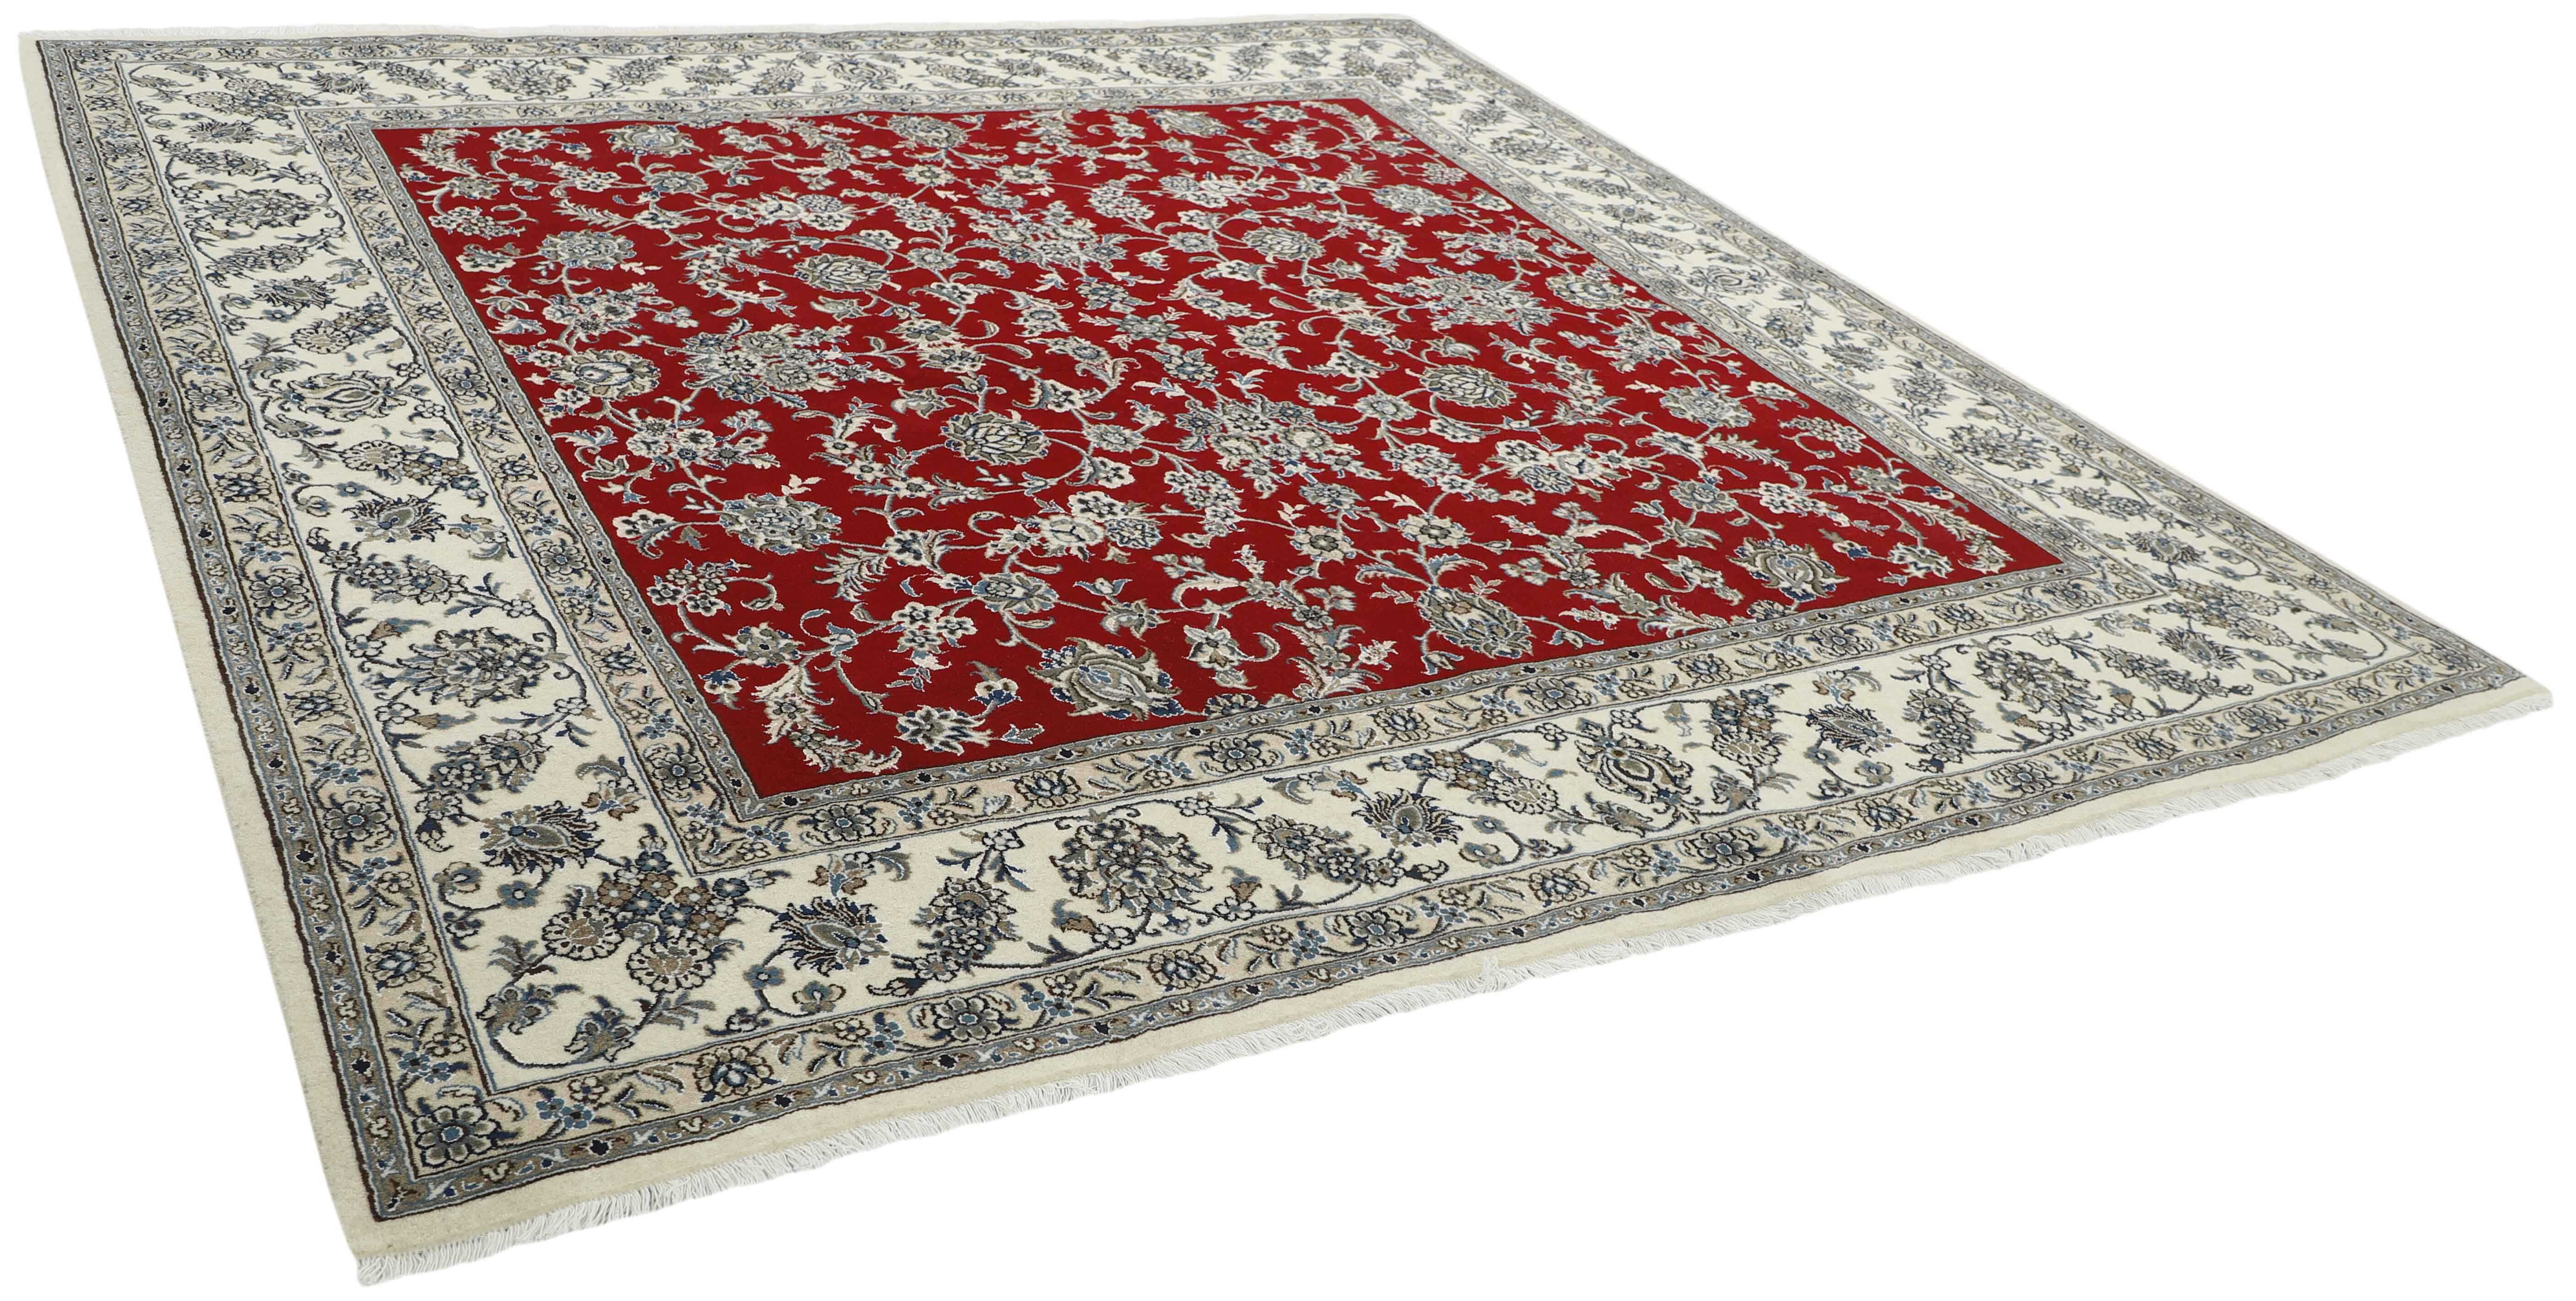 Authentic persian rug with a traditional floral design in cream and red